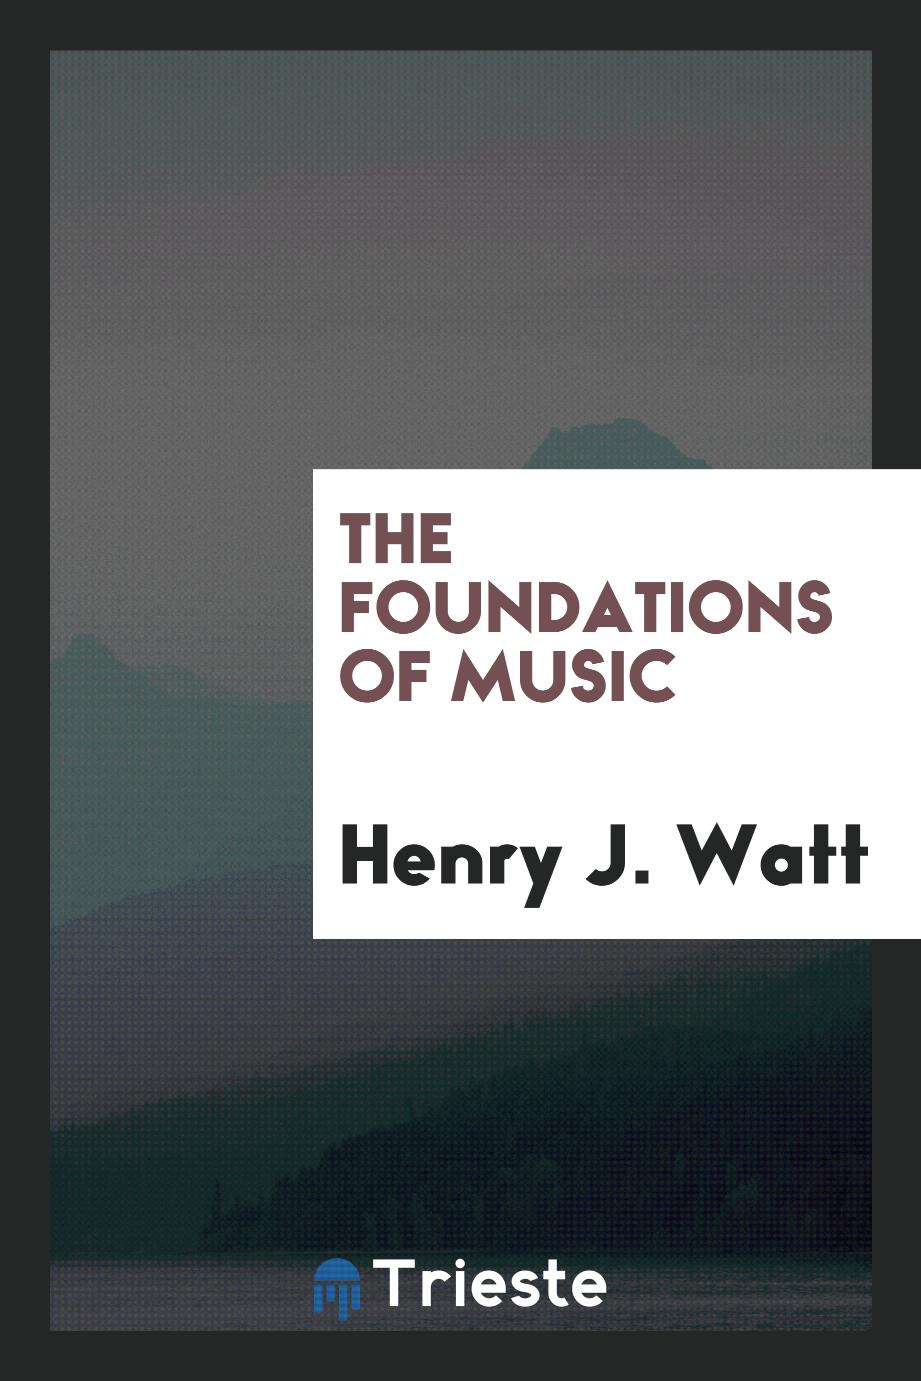 The foundations of music